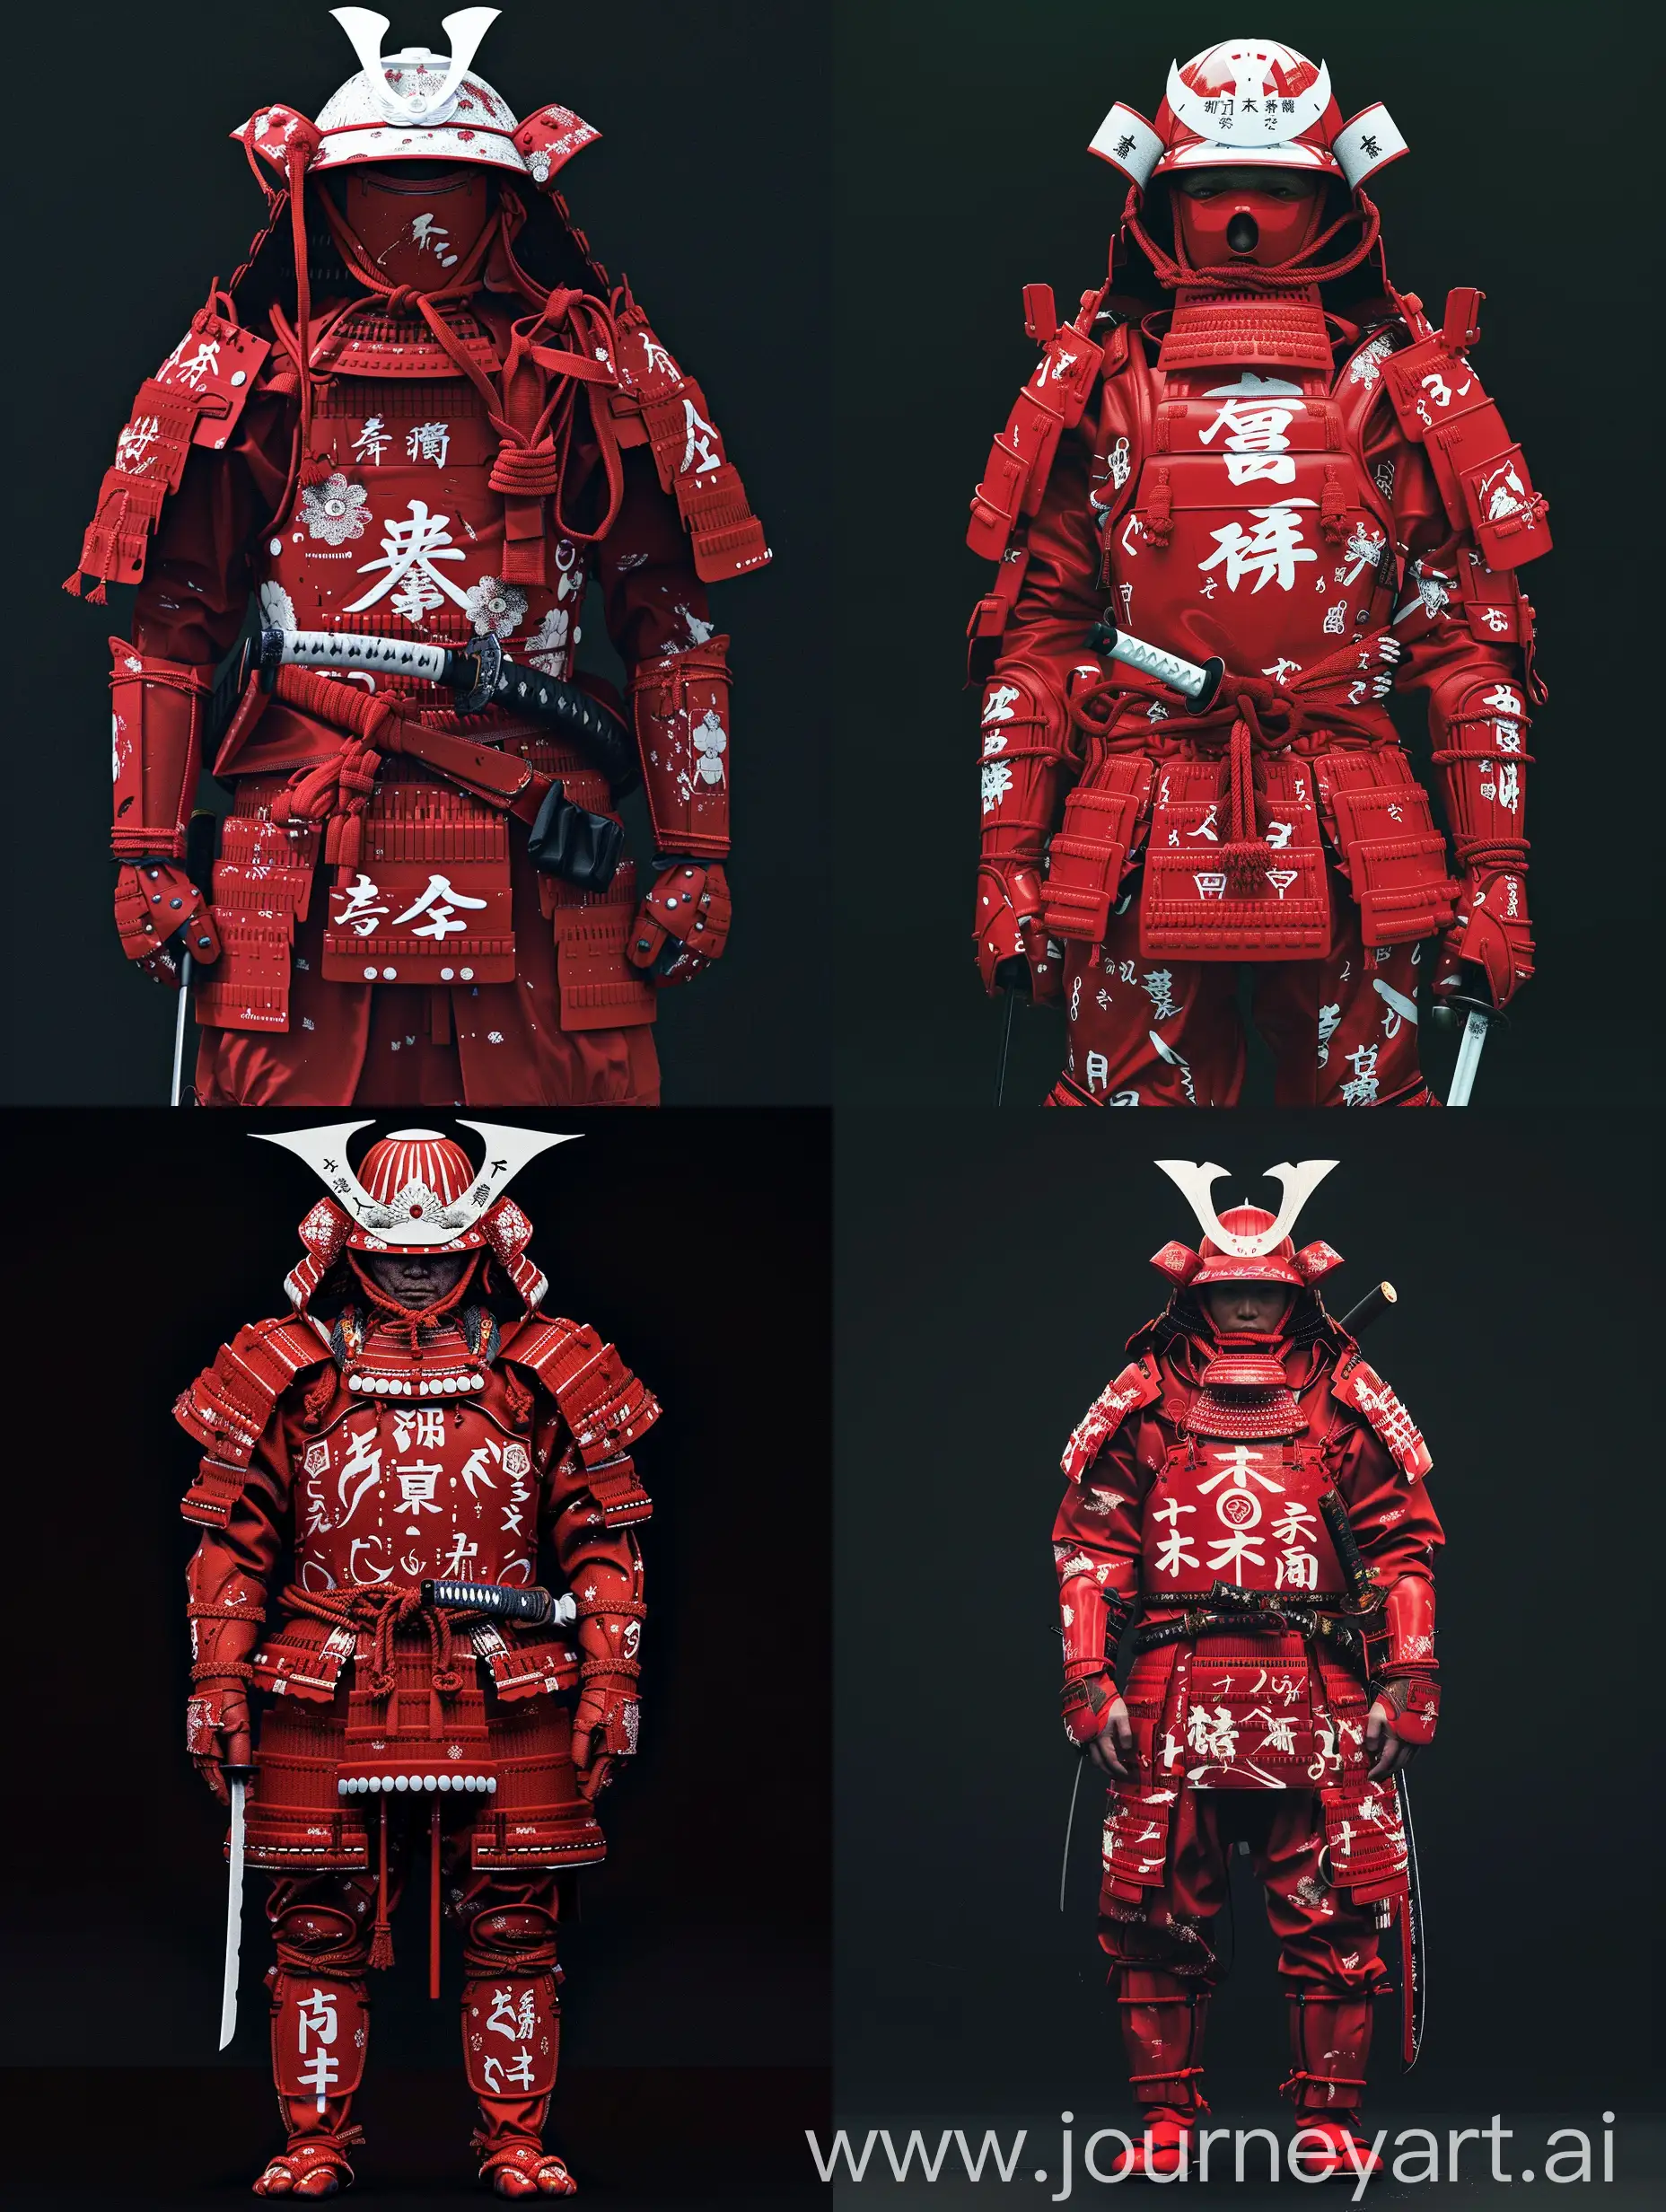 A person wearing an elaborate red samurai armor, adorned with white Japanese characters and symbols, stands against a solid black background. The armor includes a helmet with a prominent white crest, intricate shoulder guards, a chest plate, and arm and leg protectors. The individual carries a sheathed sword at their side and a smaller dagger at their waist. The overall look is detailed and traditional, exuding a sense of historical Japanese warrior culture.